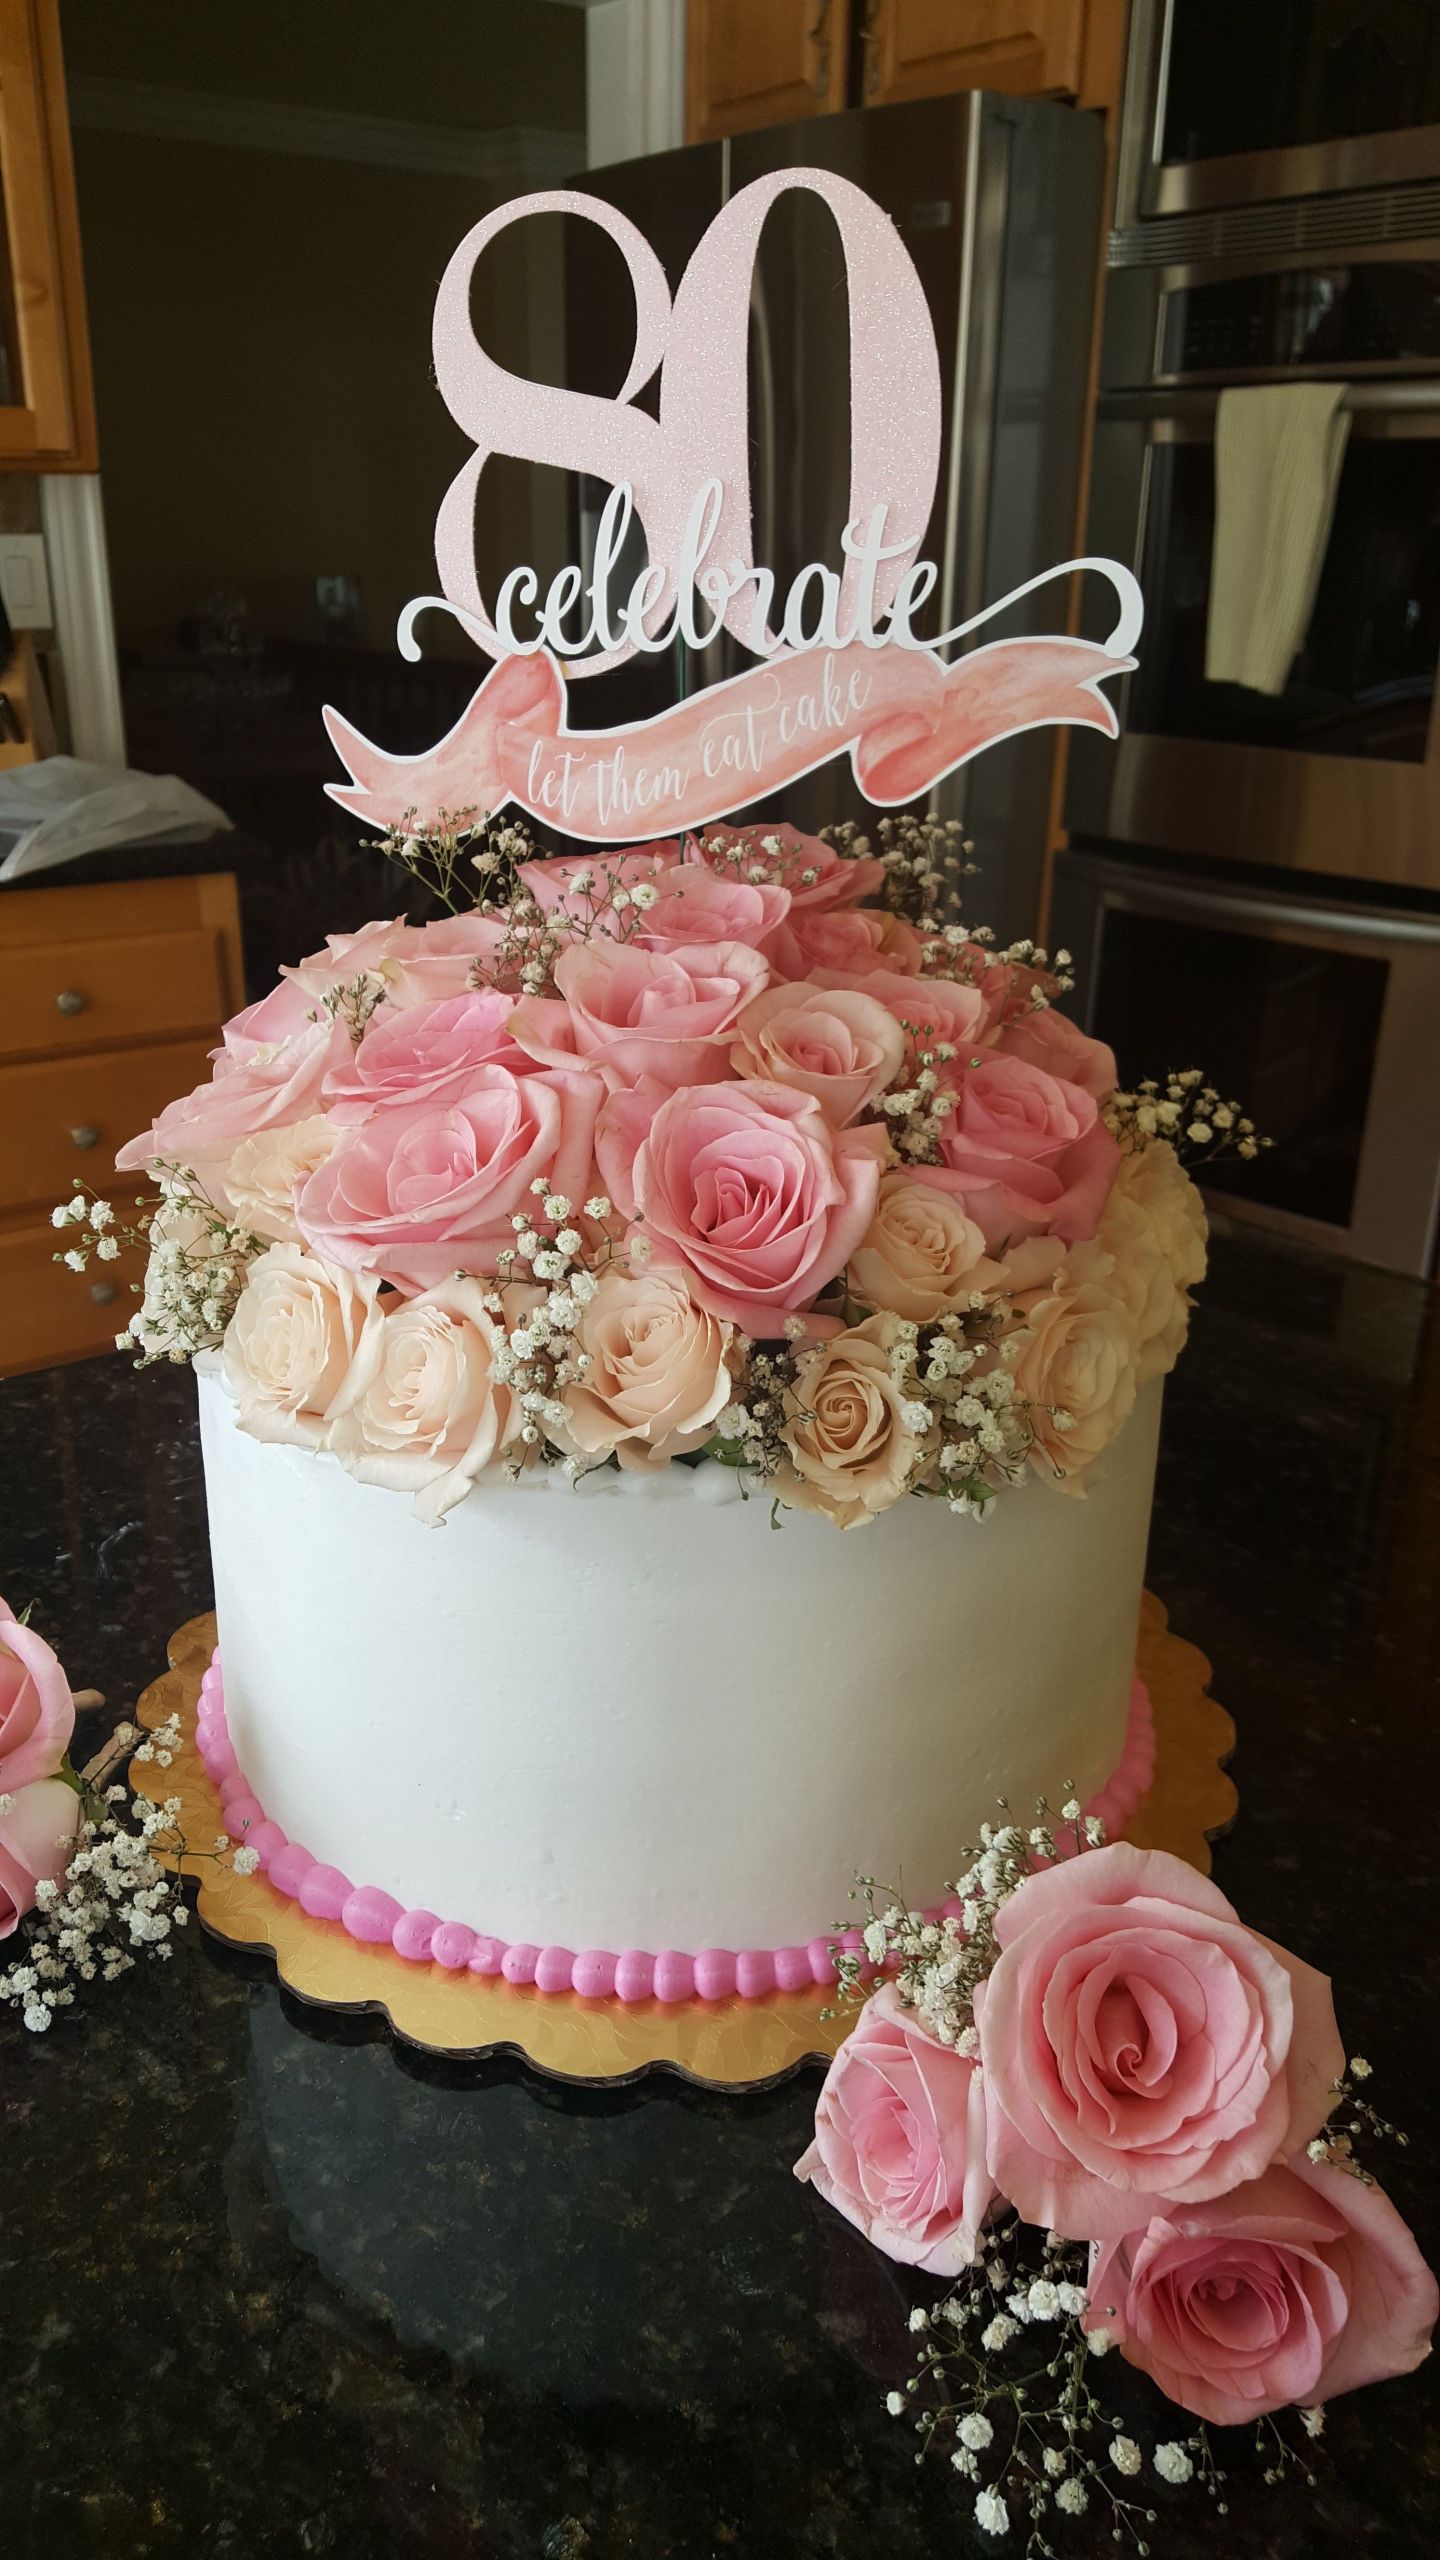 80th Birthday Cake
 80th birthday cake with fresh flower topper in 2019